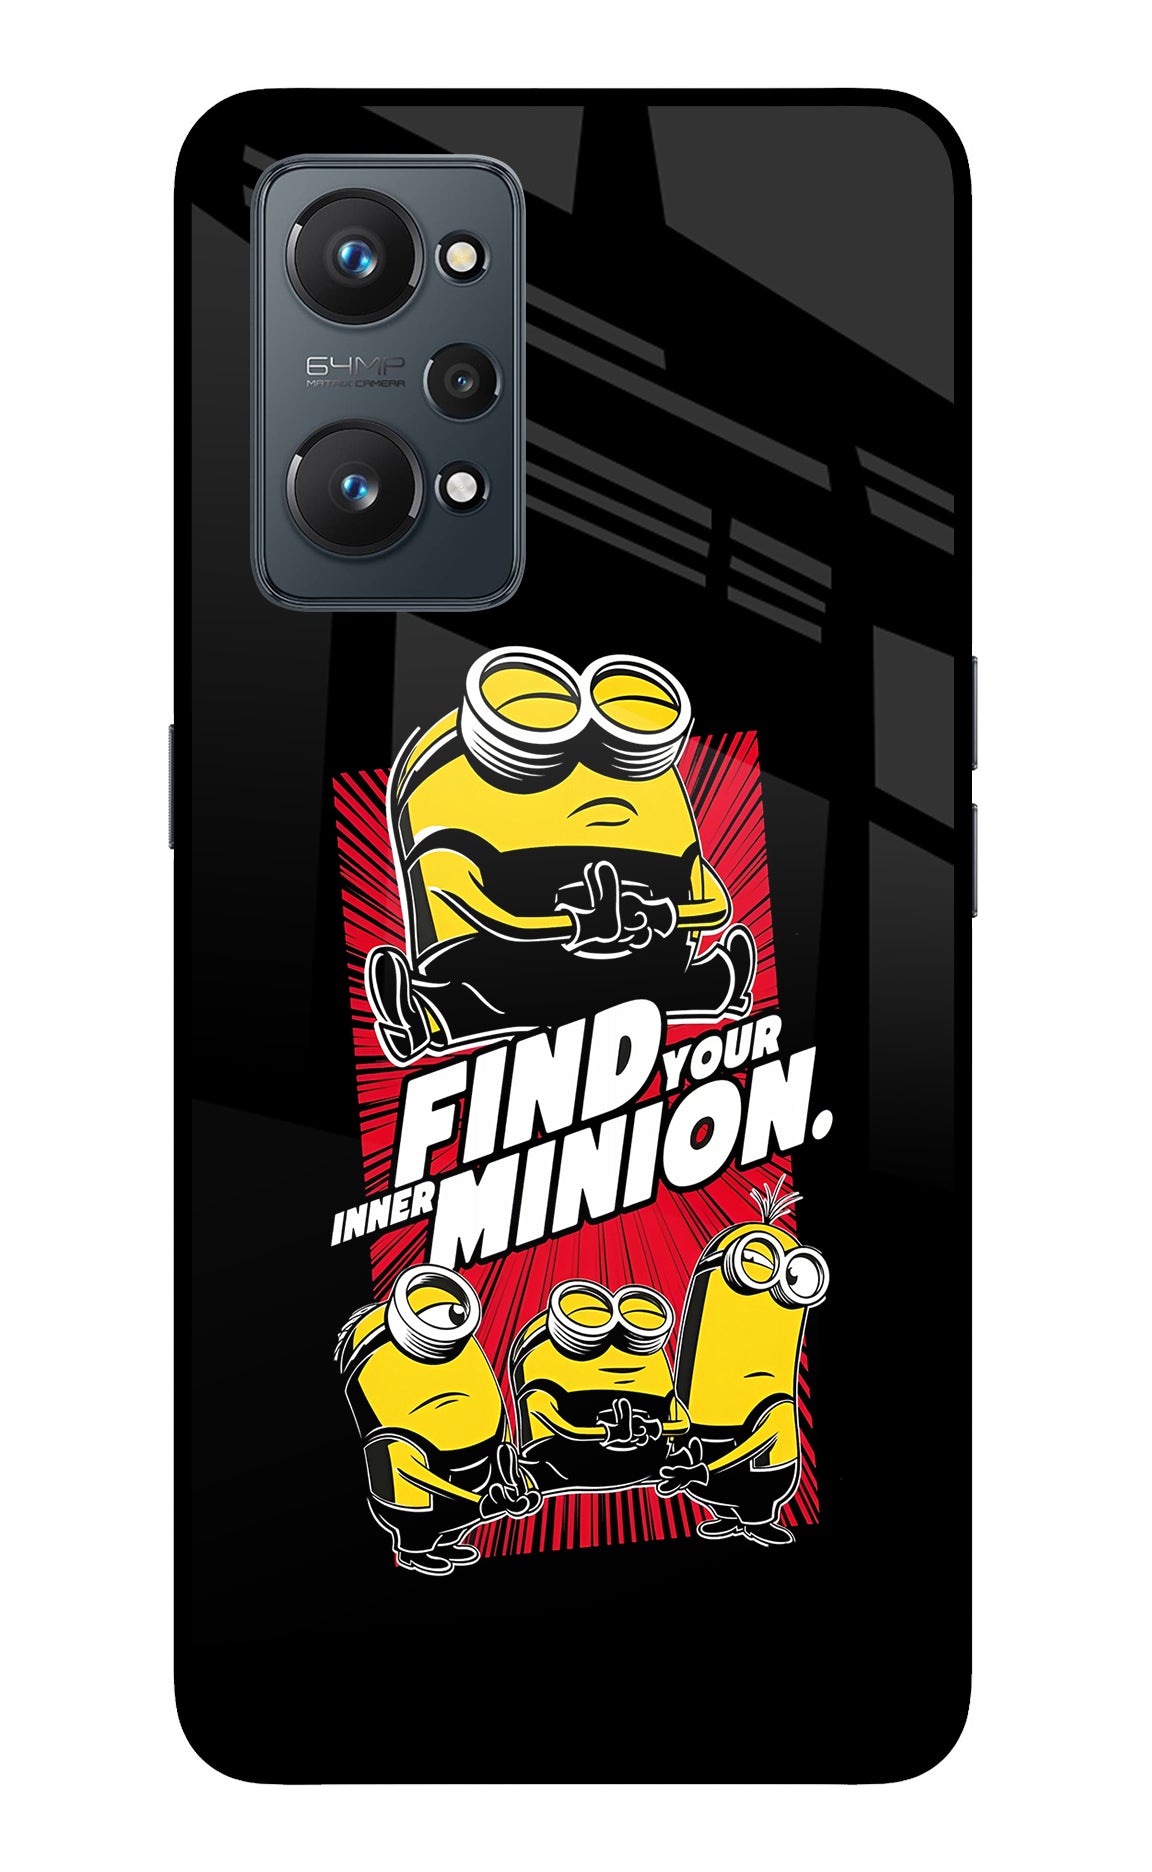 Find your inner Minion Realme GT 2 5G Back Cover